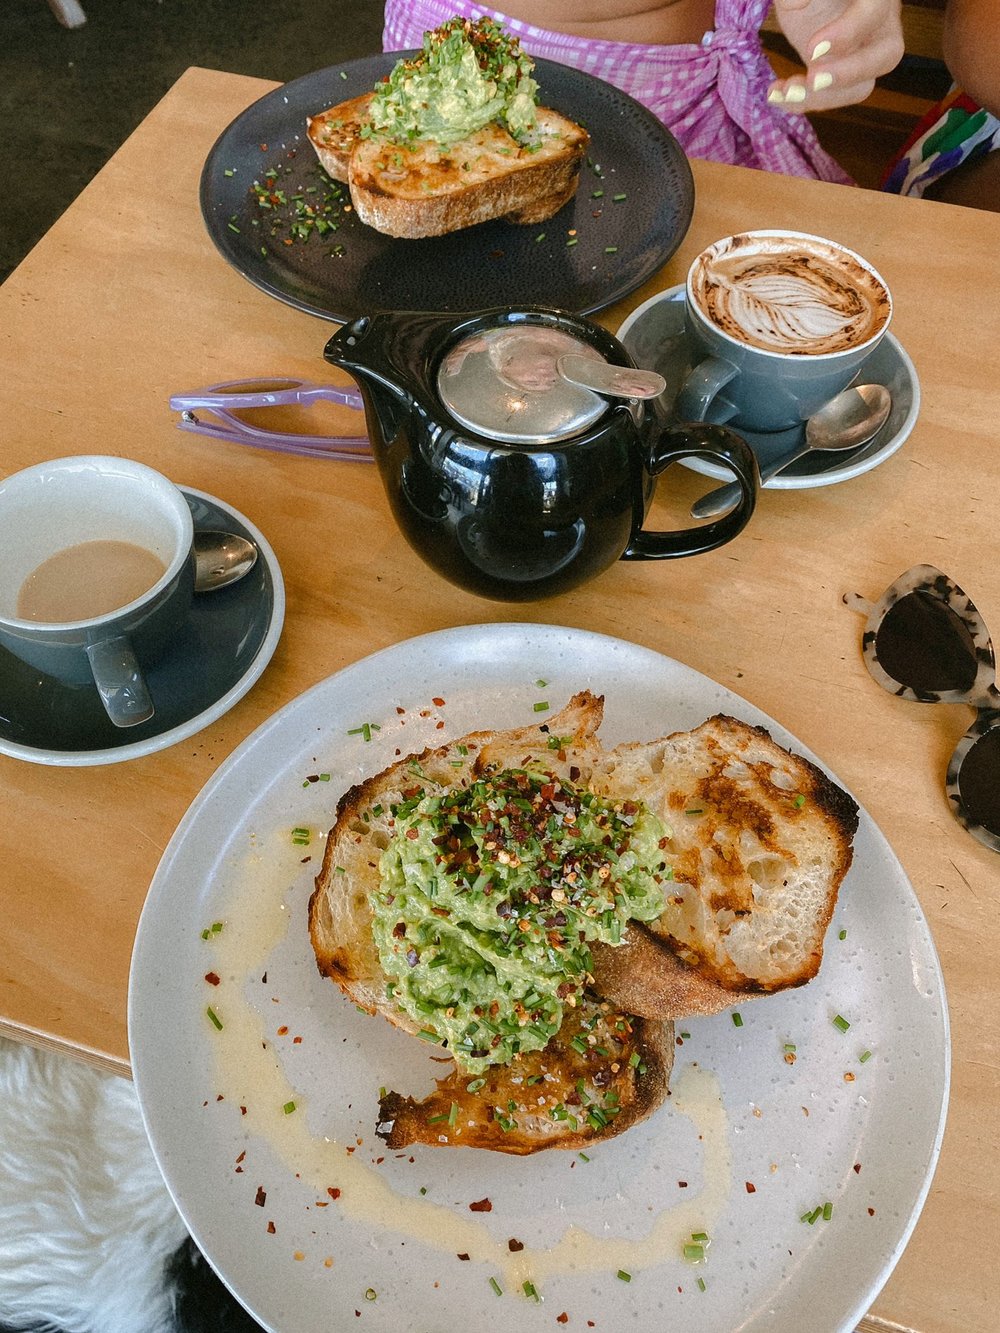  Good Day Coffee Gold Coast. This guide to the best cafes in Gold Coast Australia includes the best breakfast spots in Gold Coast and the best vegan cafes in Gold Coast. Find the best cafes in Burleigh Head, Palm Beach, and more of the best places to